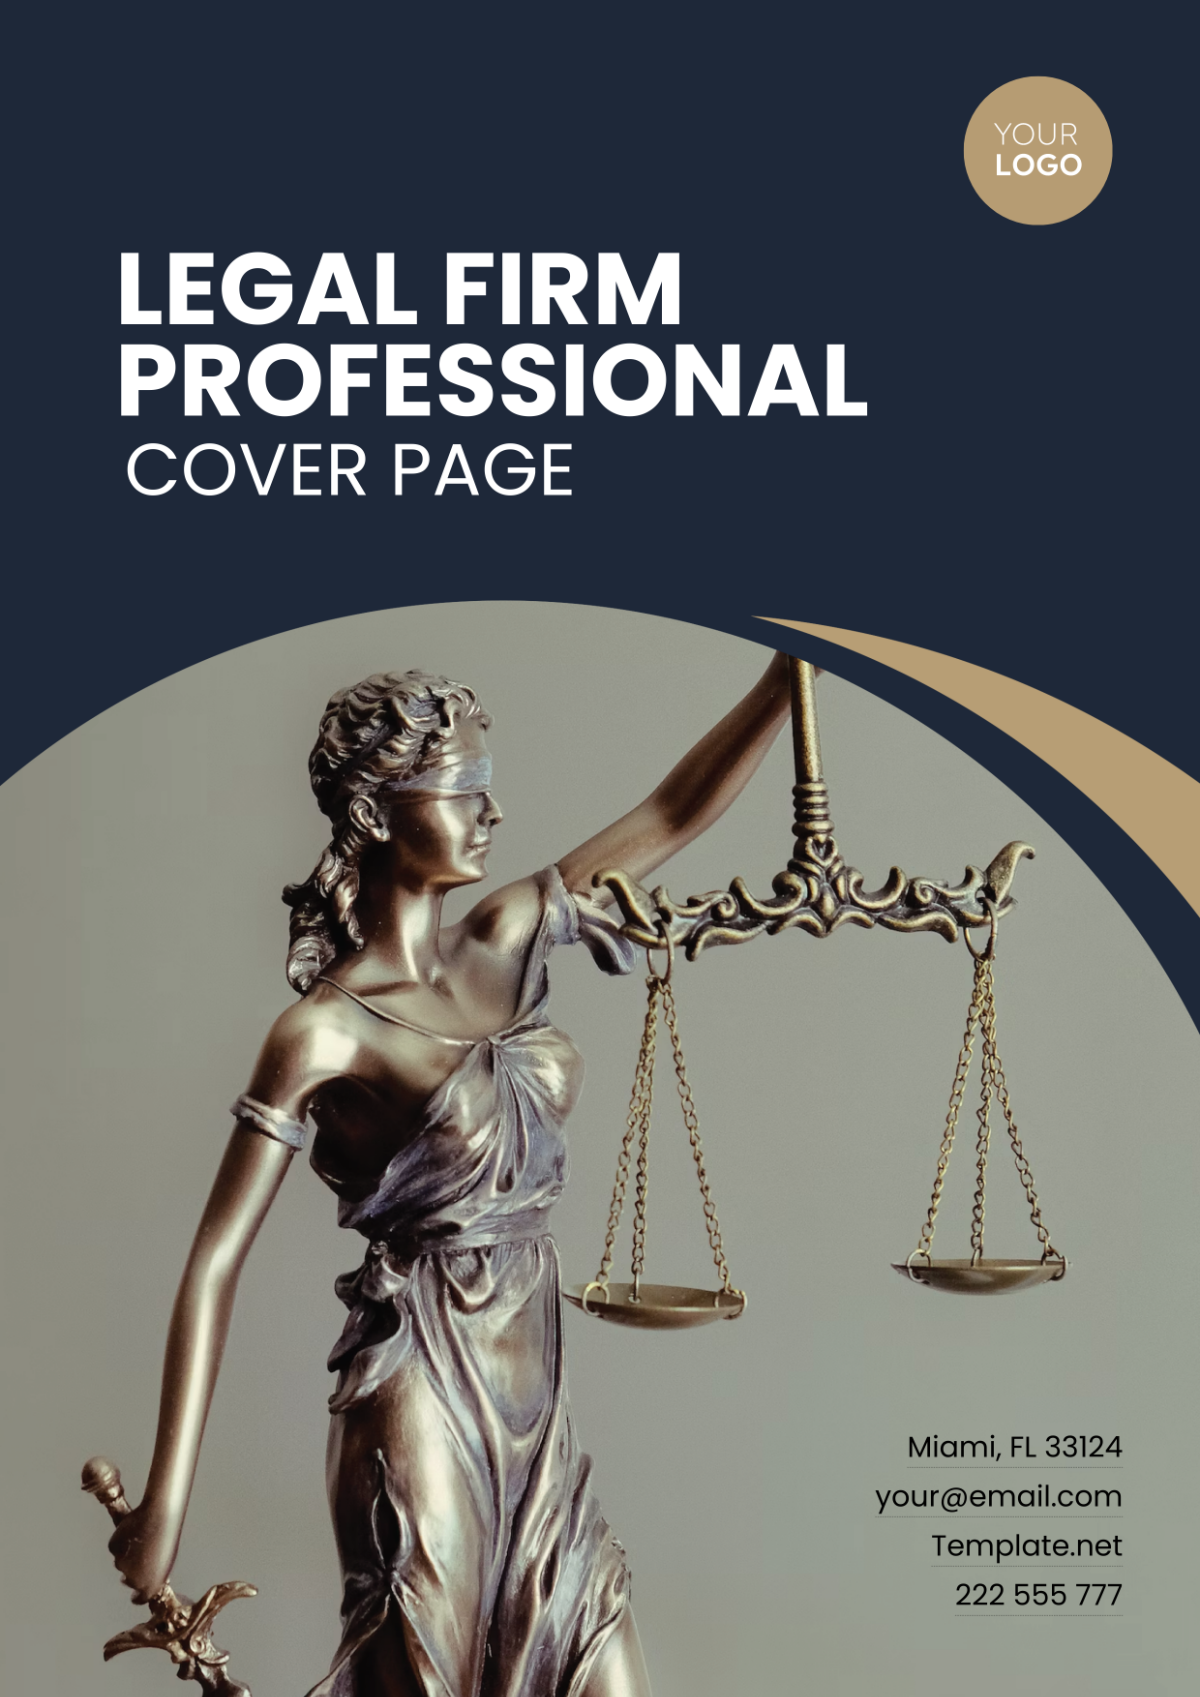 Legal Firm Professional Cover Page